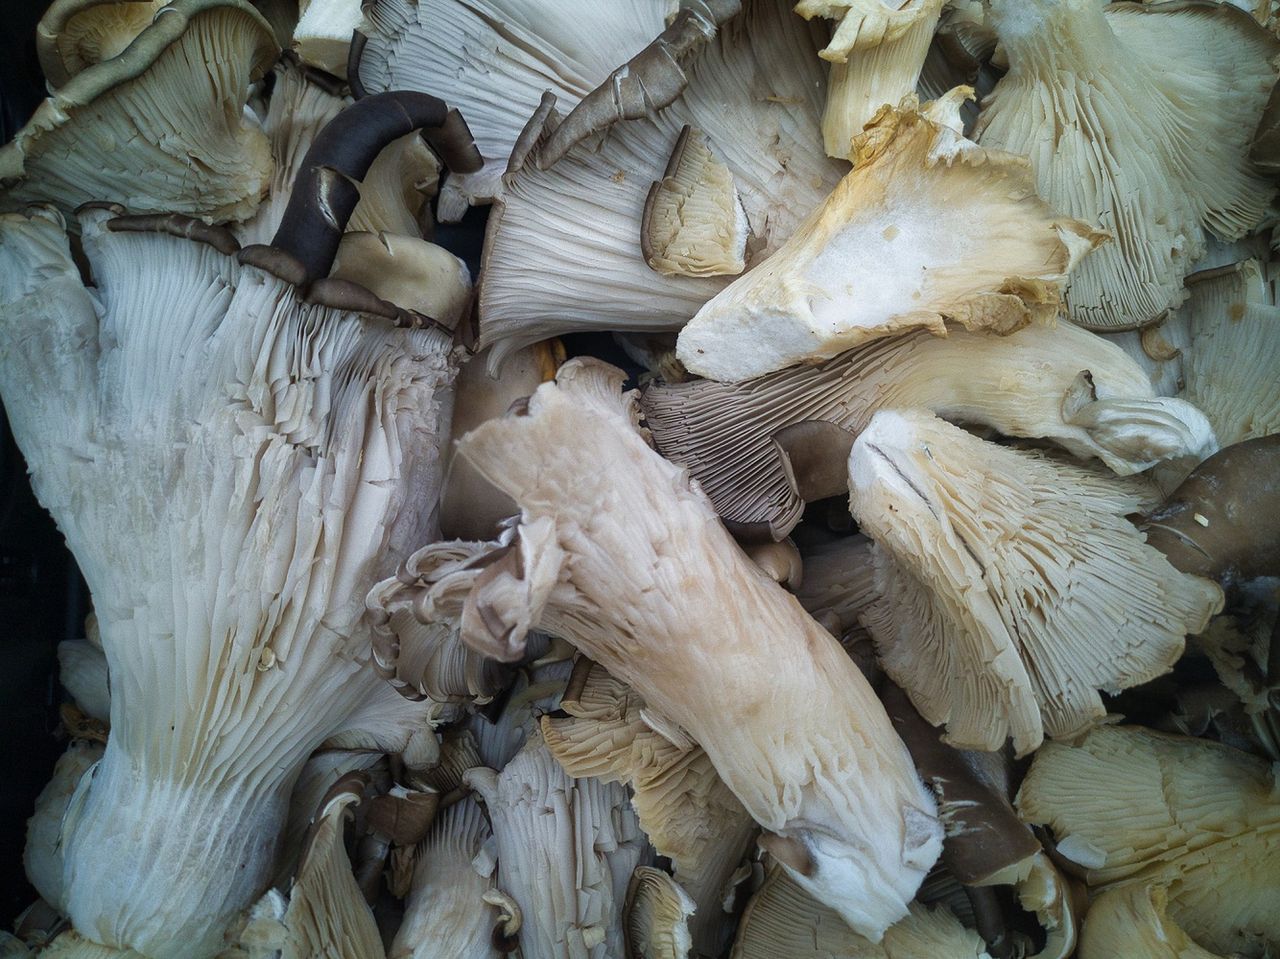 King oyster mushrooms: the versatile food lowering bad cholesterol and adding flavor to your meals